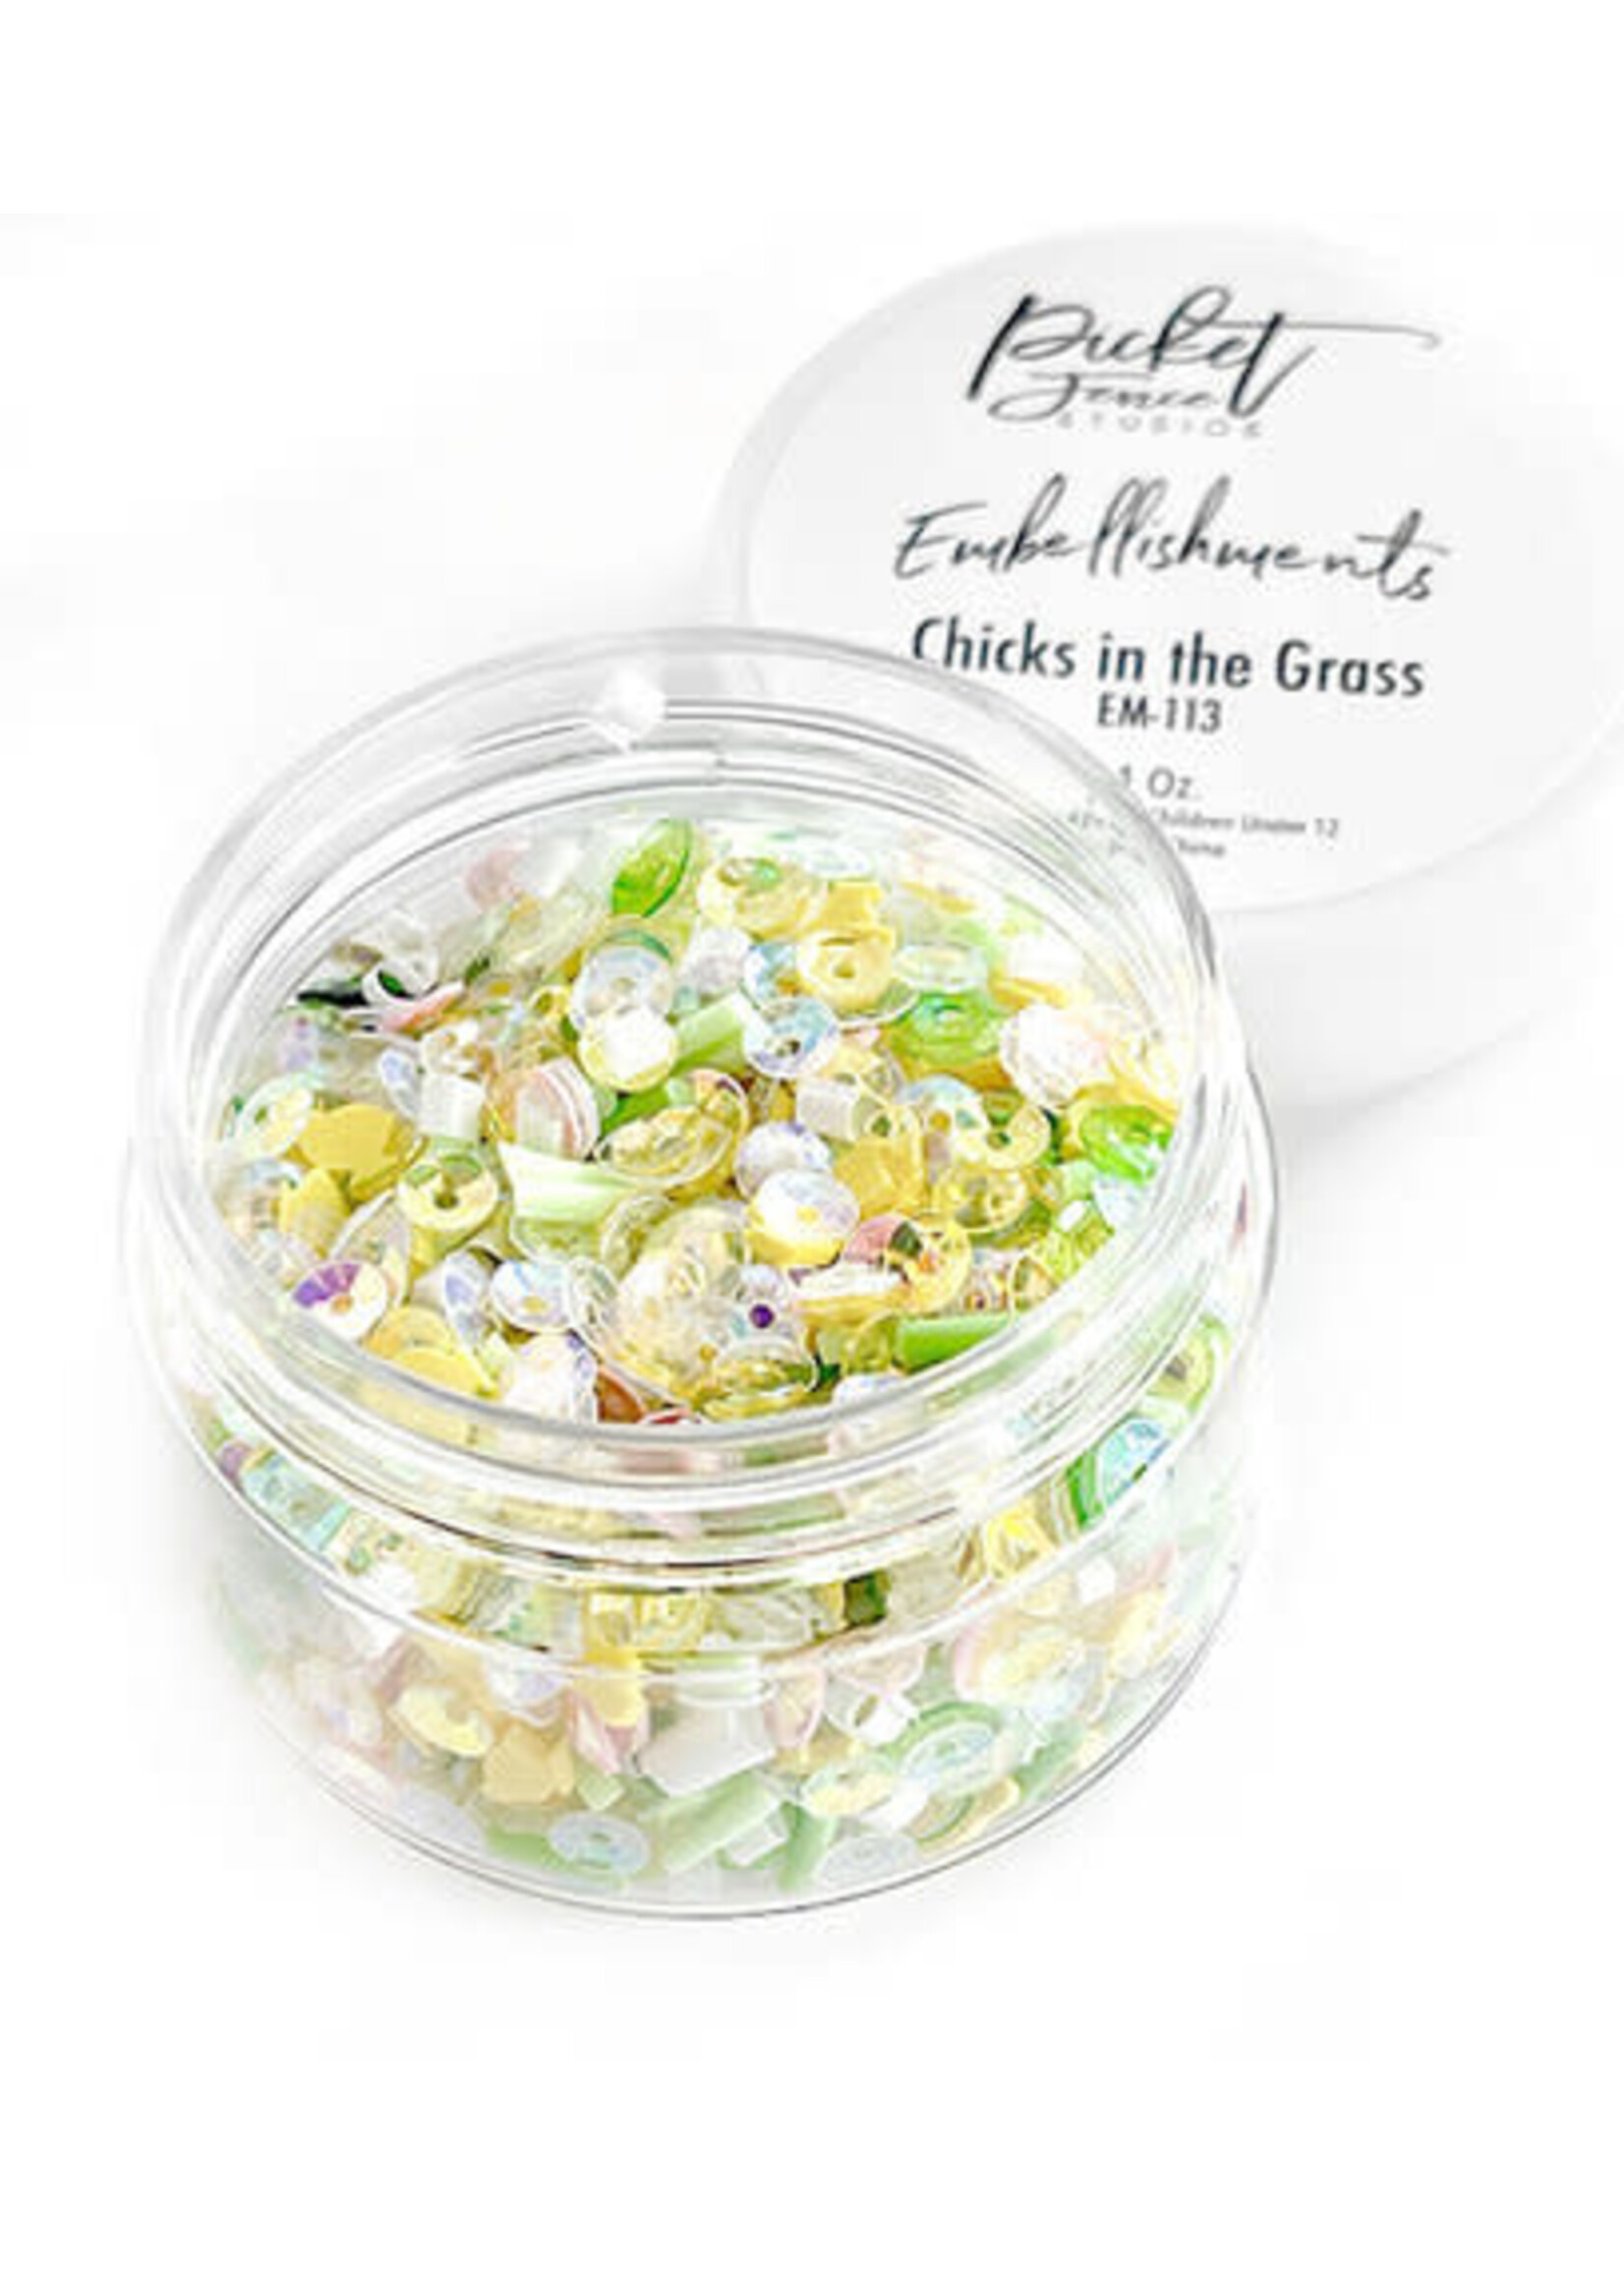 Picket Friends Embellishments Chicks in the Grass 1 oz (EM-113)